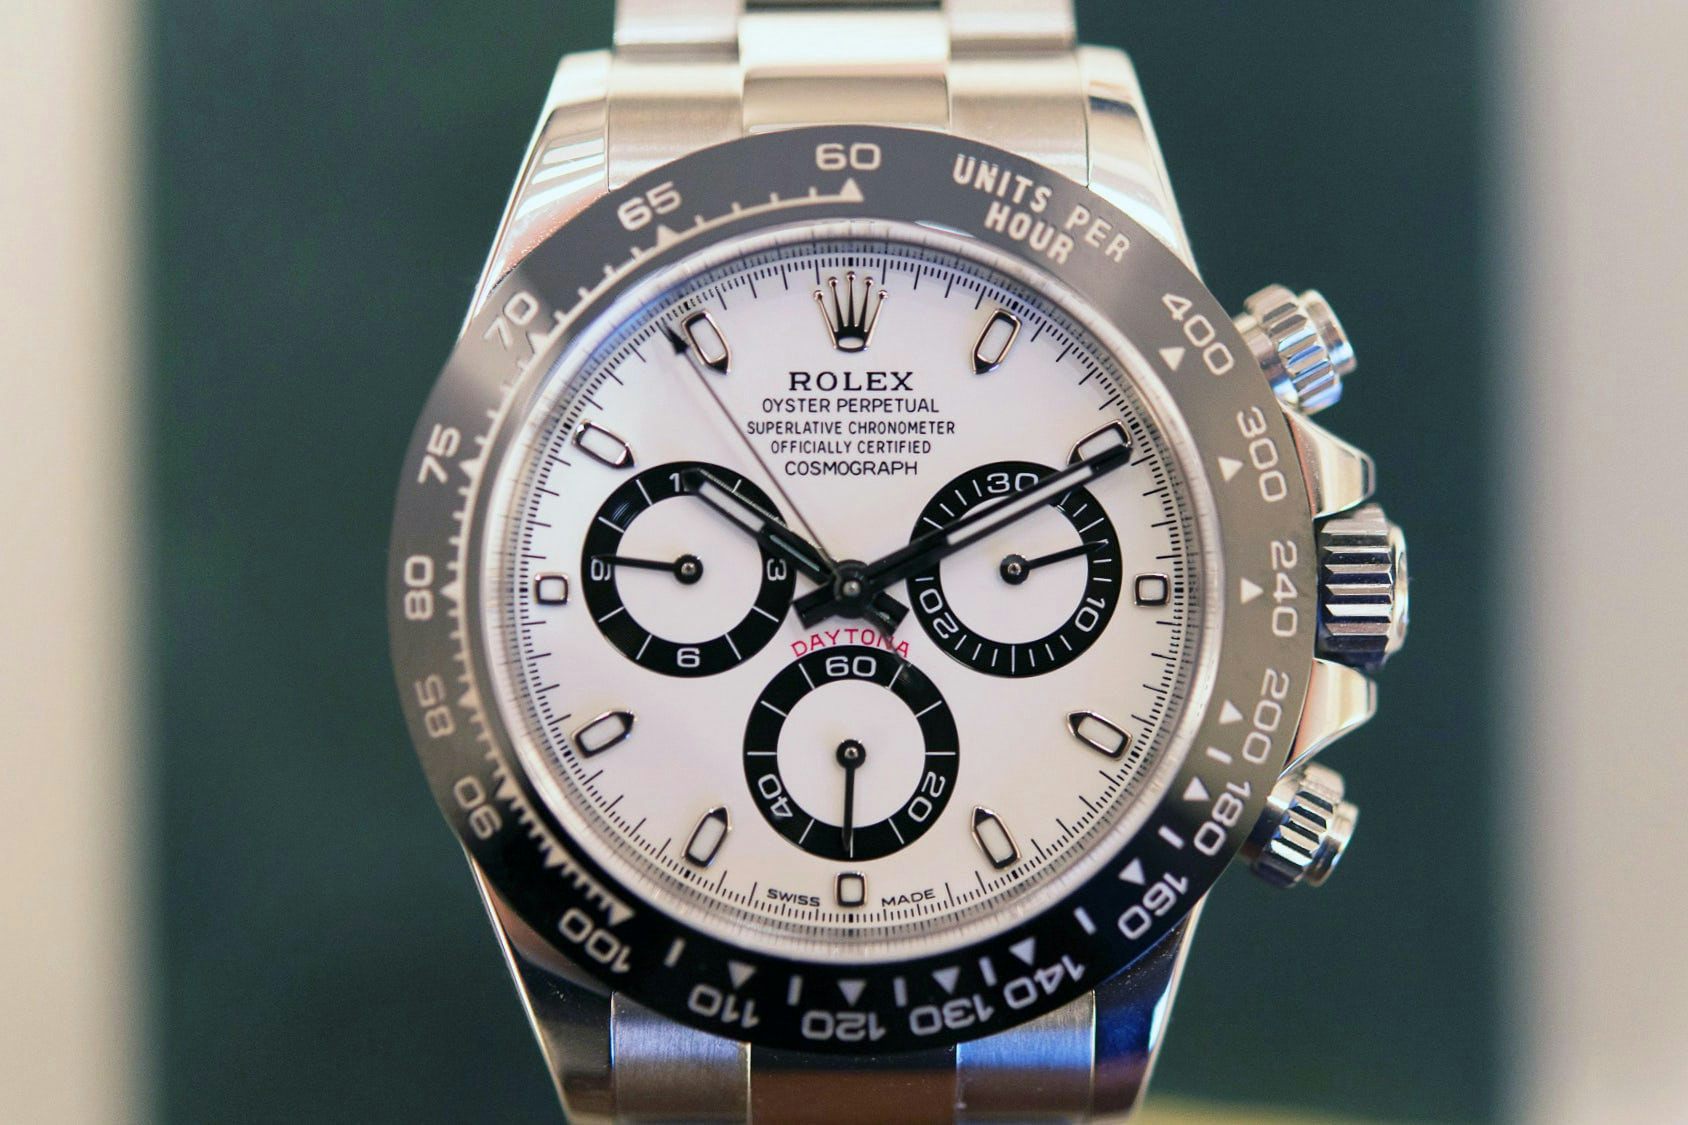 Sunday Why Isn't Rolex Considered One Of 'The Big Three?' - Hodinkee